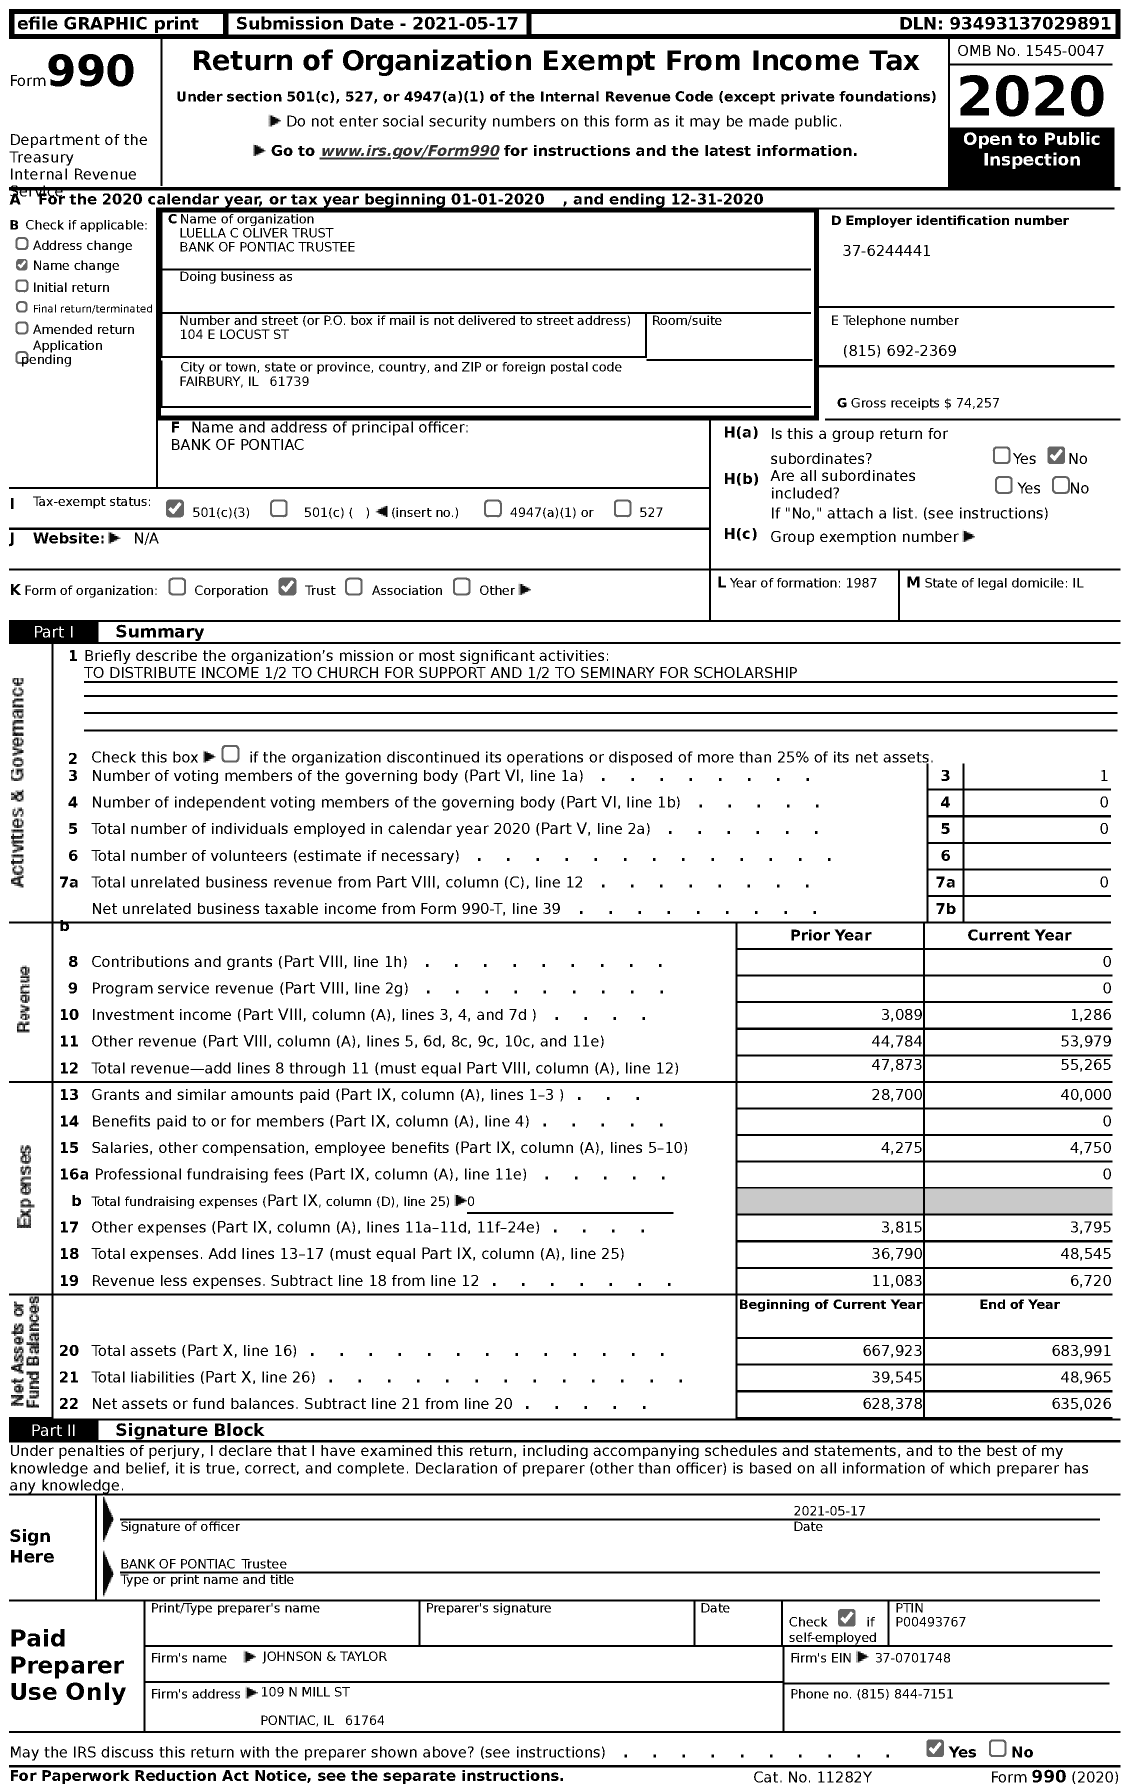 Image of first page of 2020 Form 990 for Luella C Oliver Trust Bank of Pontiac Trustee